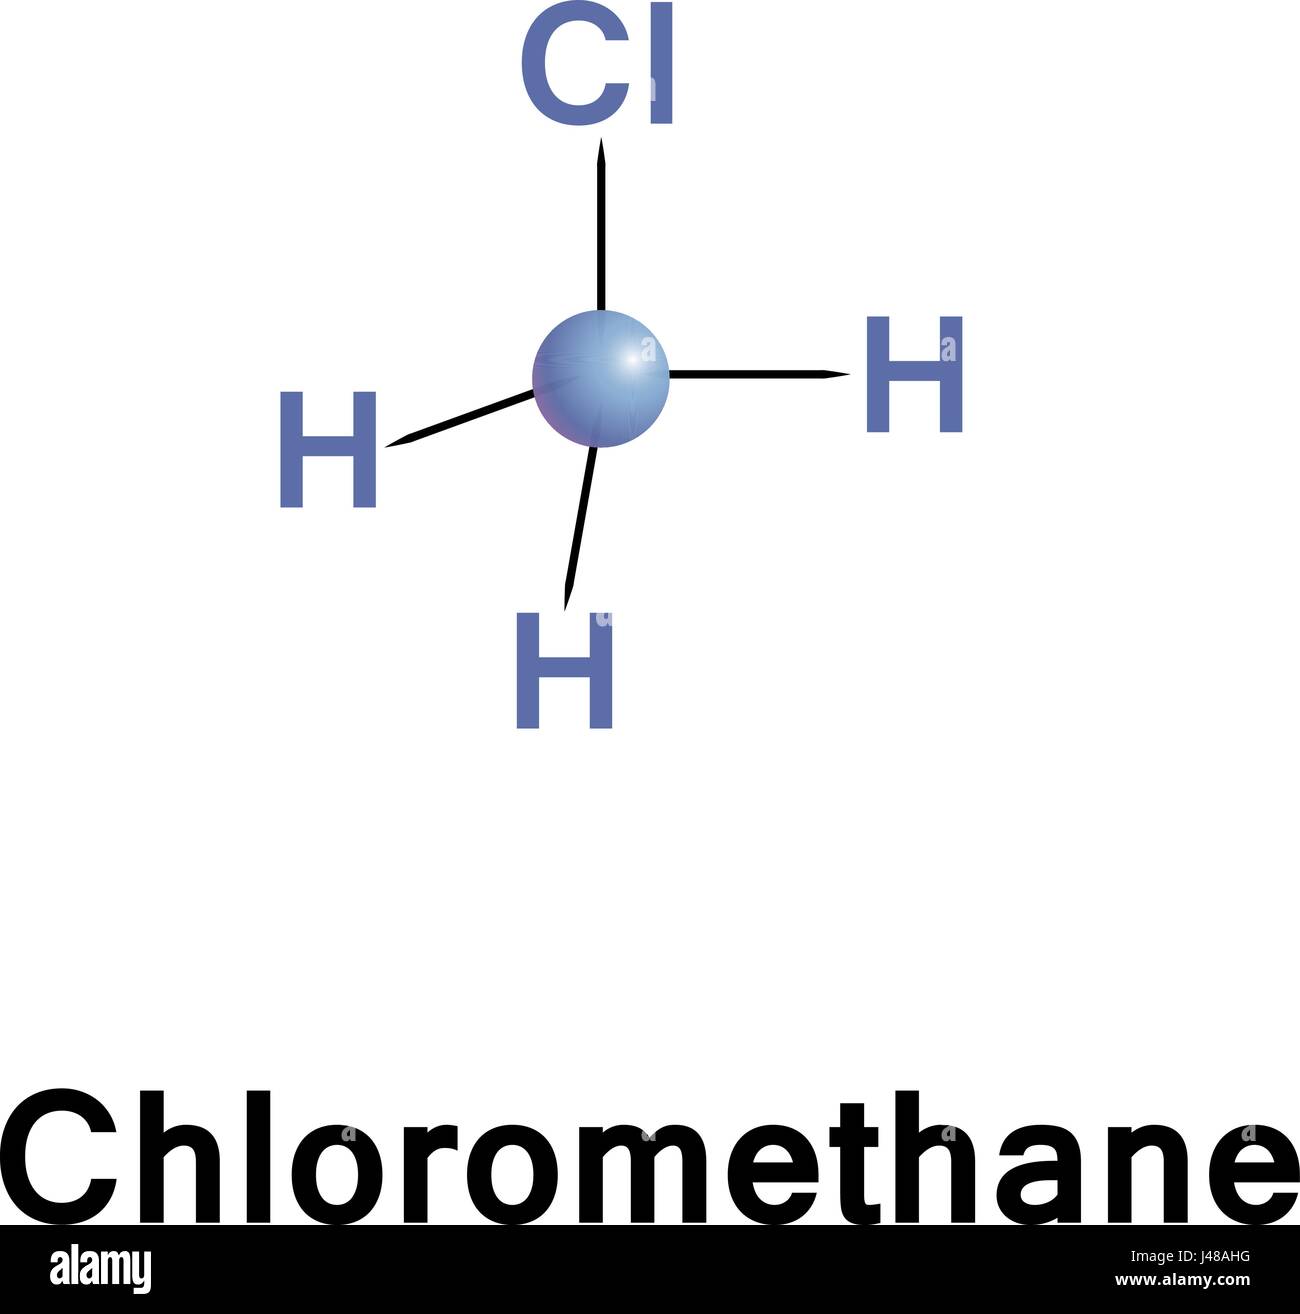 Chloromethane, also called methyl chloride, Refrigerant 40, R40 or HCC 40, is a chemical compound of the group of organic compounds called haloalkanes Stock Vector